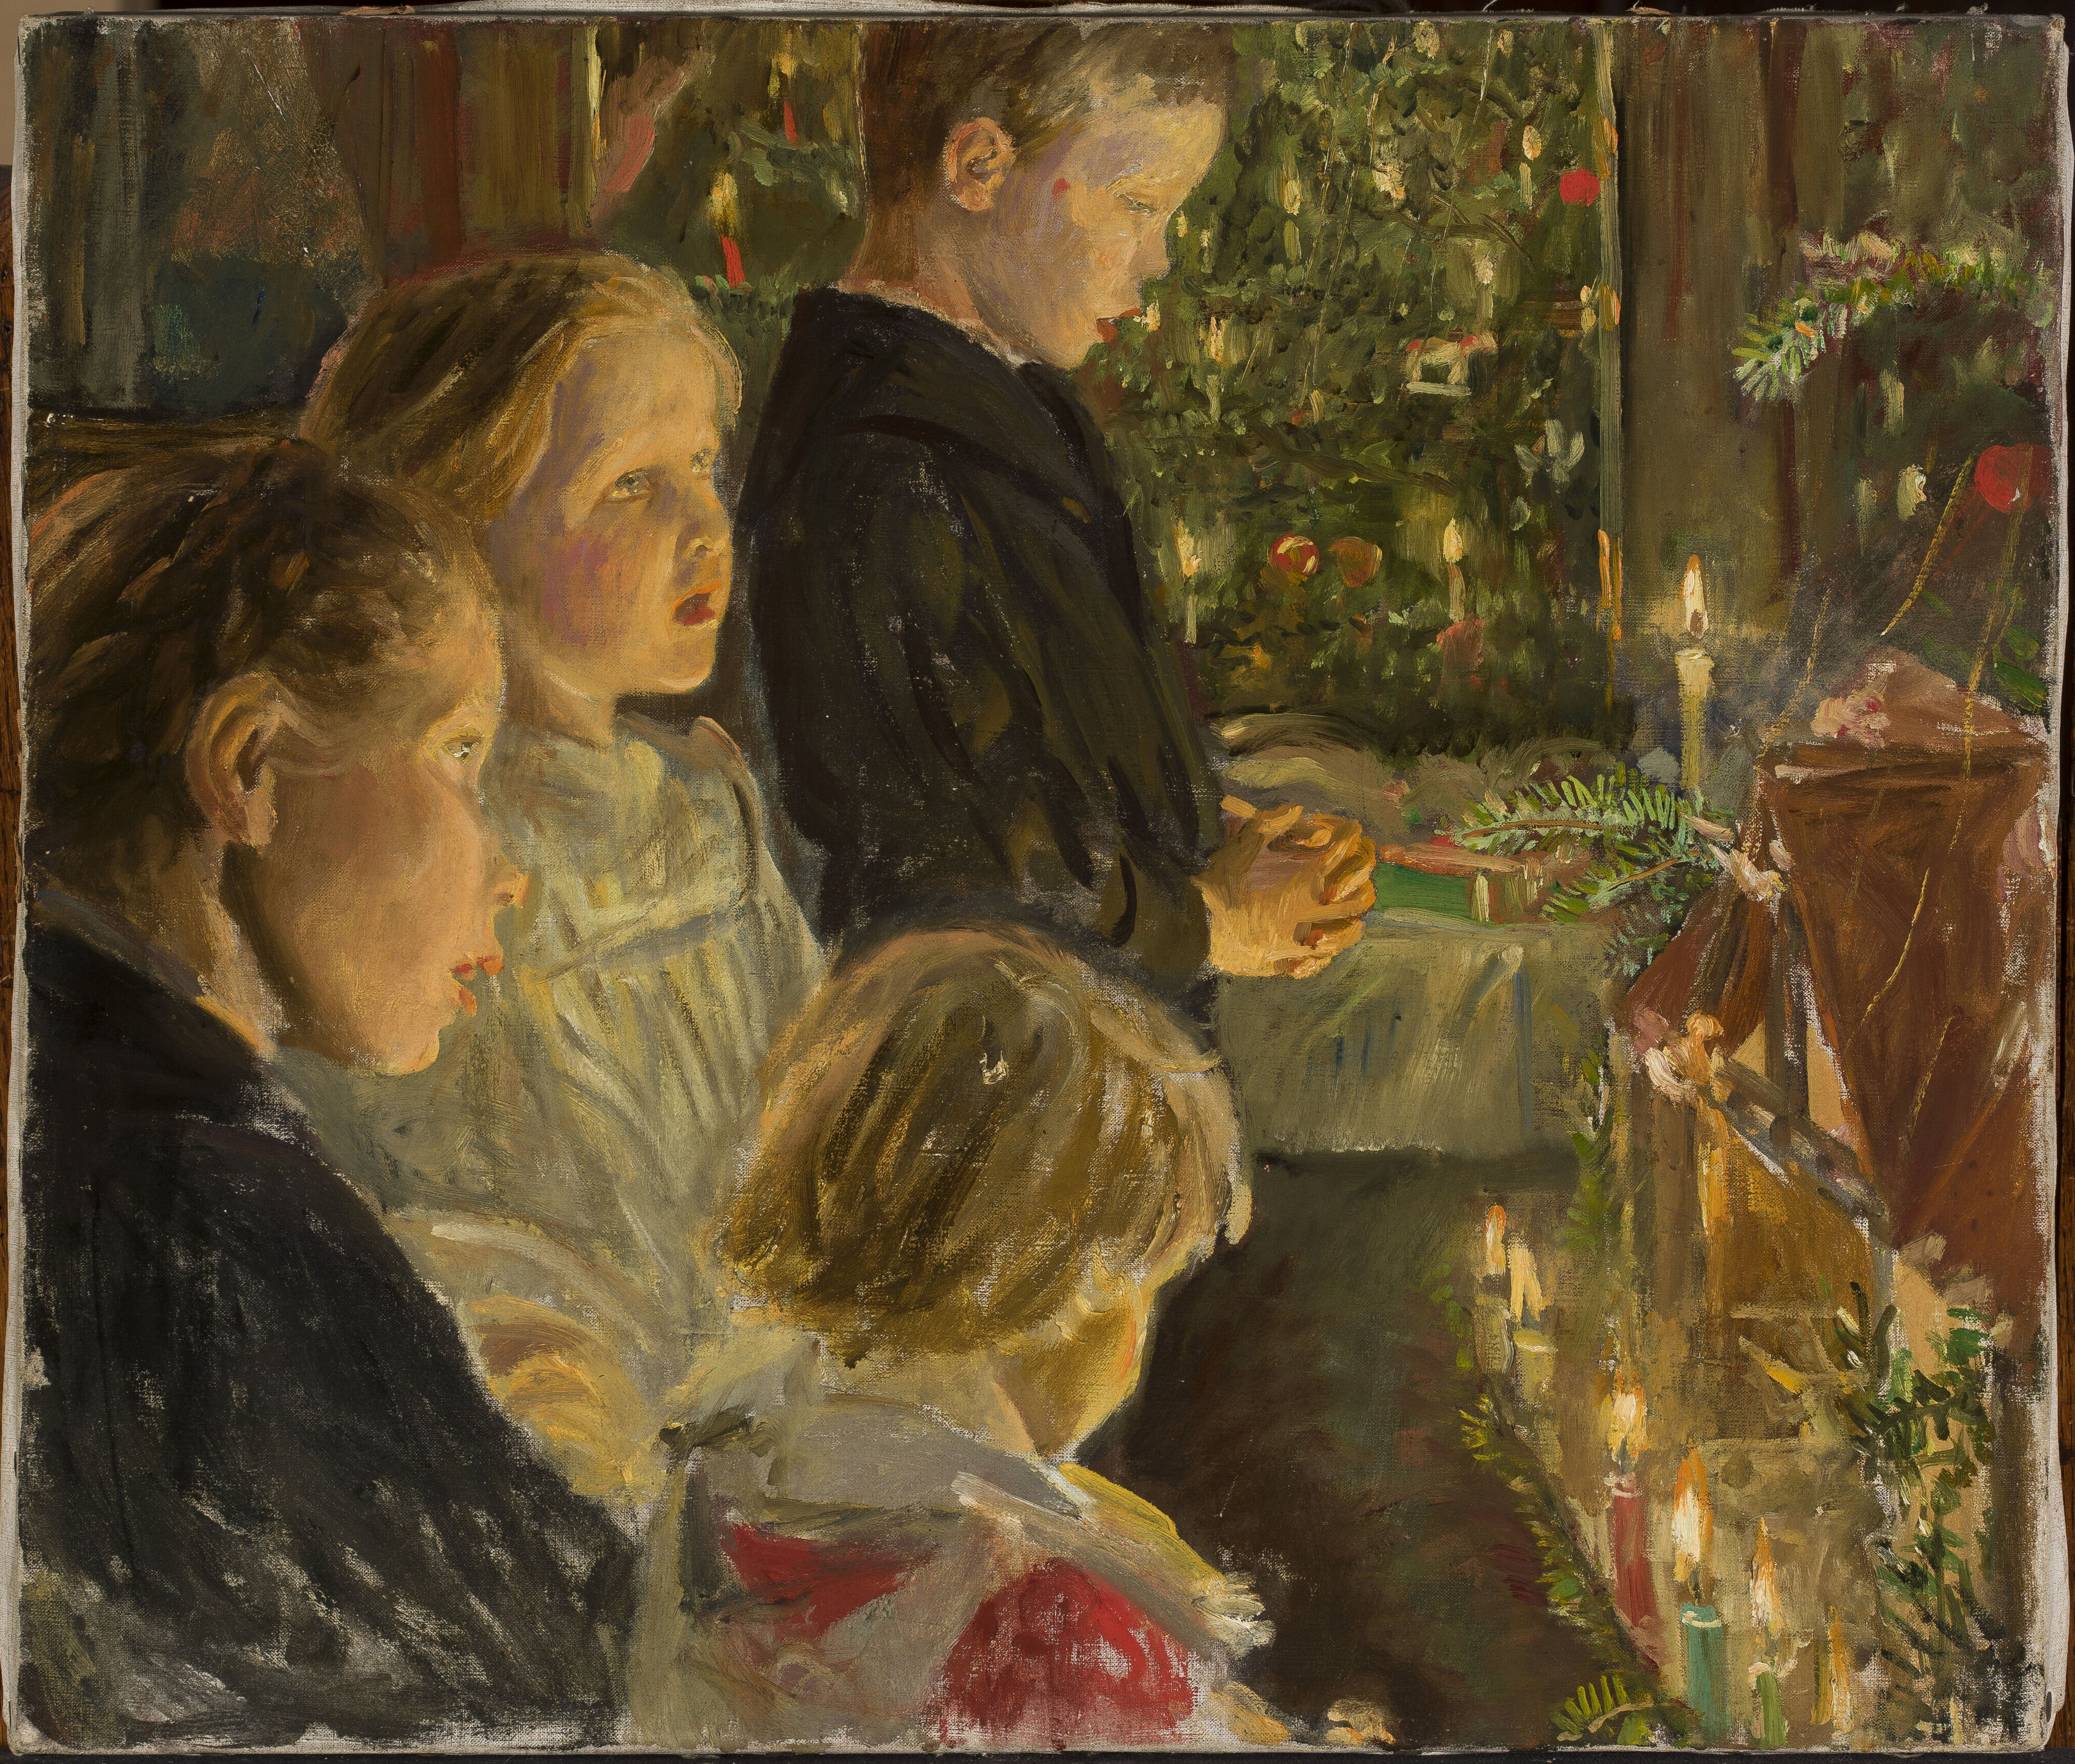 Children by the Christmas Tree by Leopold Graf von Kalckreuth - between 1900 and 1925 - 41.5 x 49 cm National Museum in Warsaw